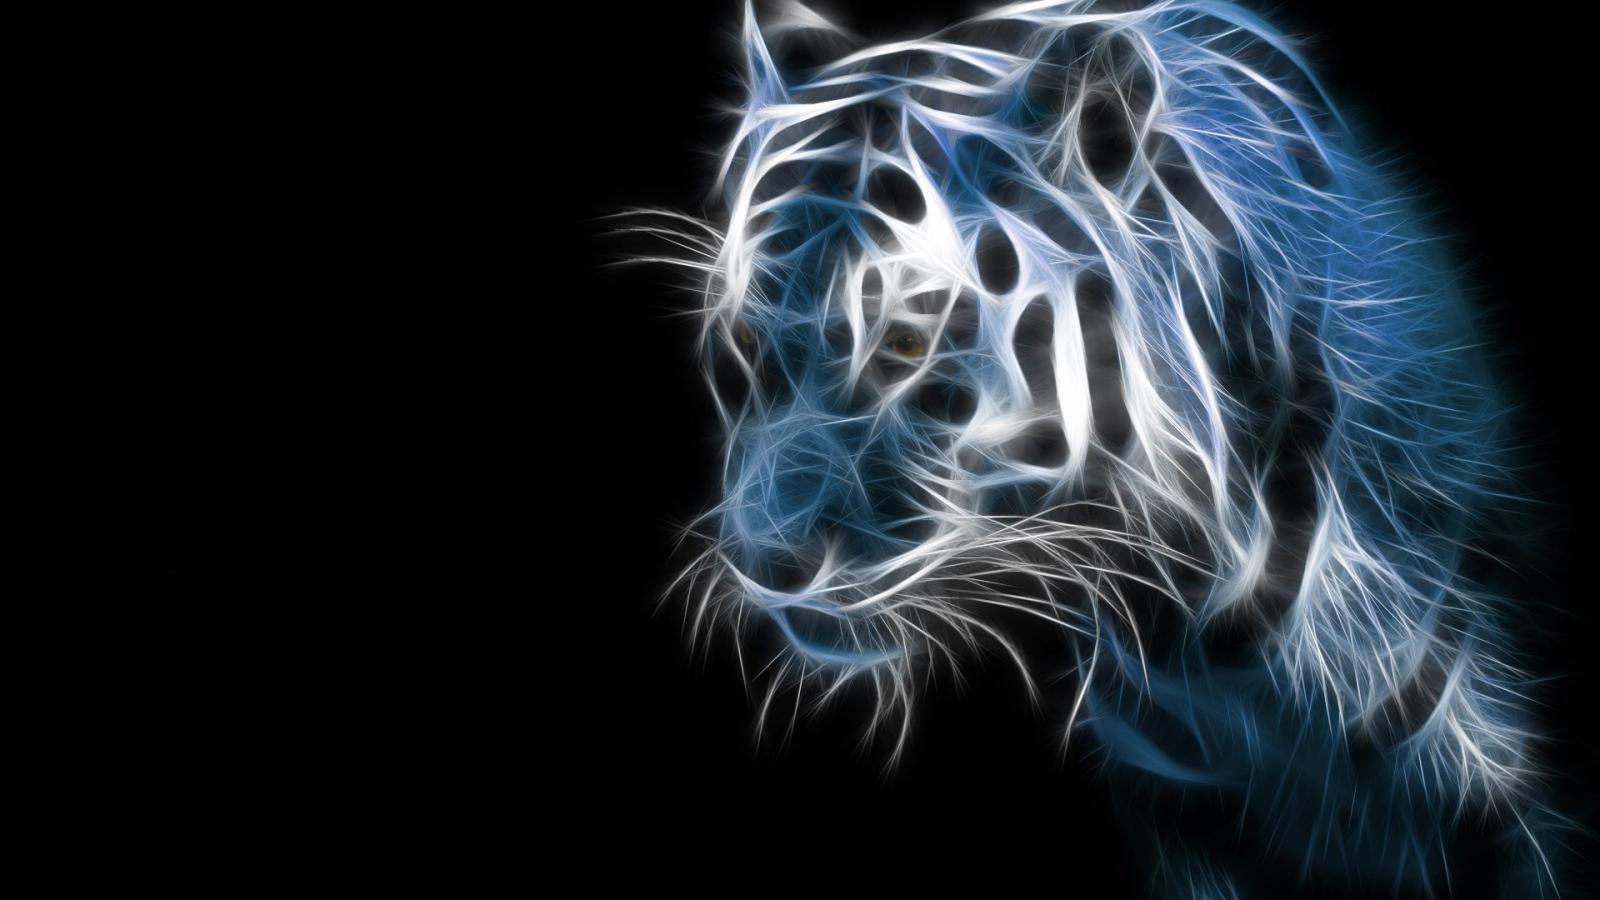 Animal 3d wallpapers hd backgrounds - - High Quality and other